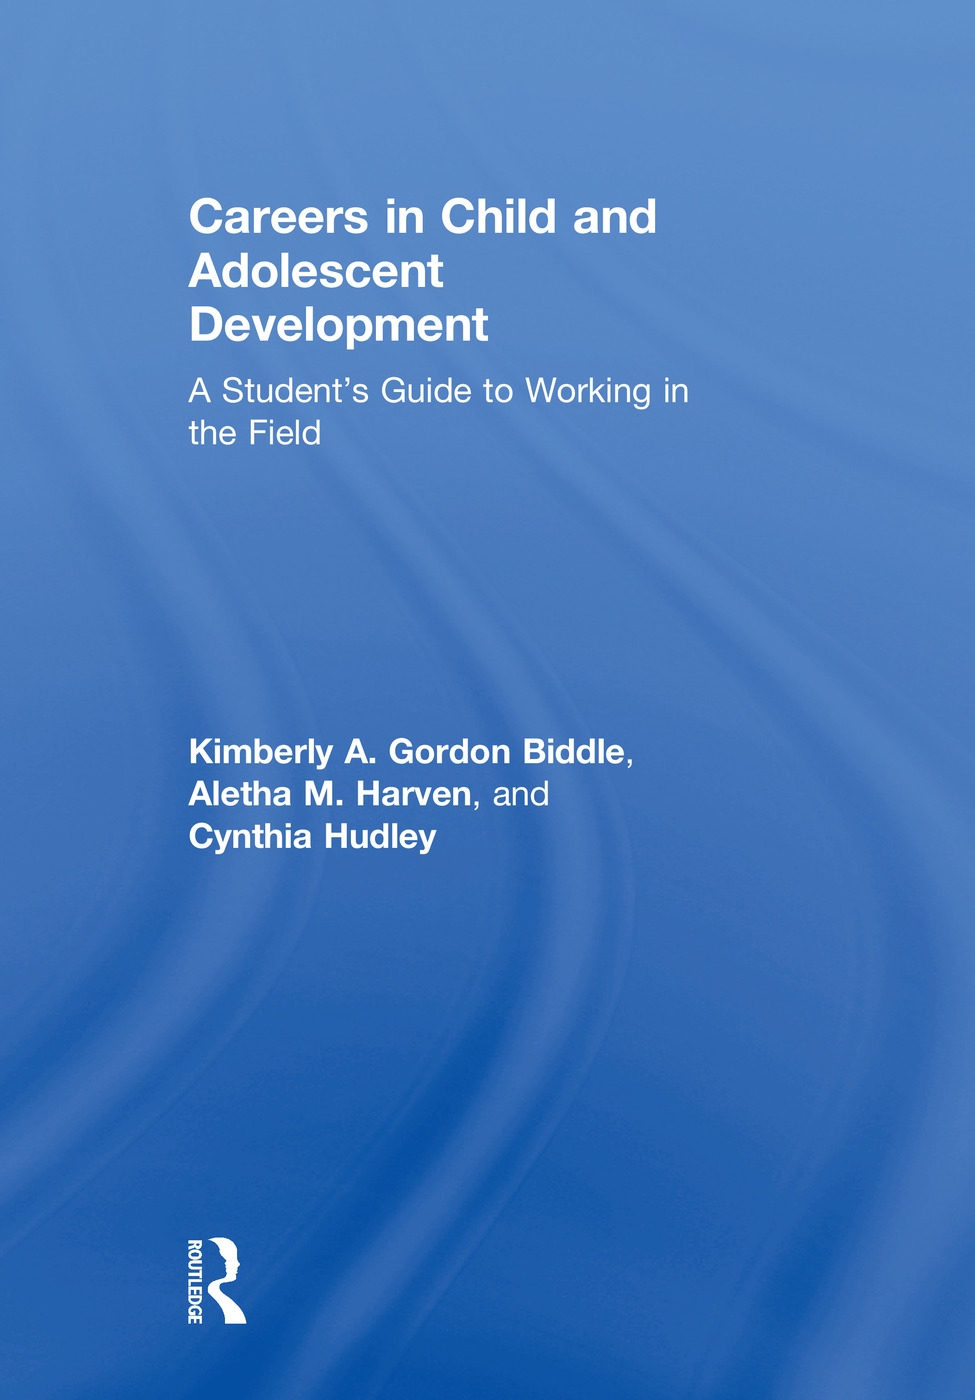 Careers in Child and Adolescent Development: A Student’s Guide to Working in the Field